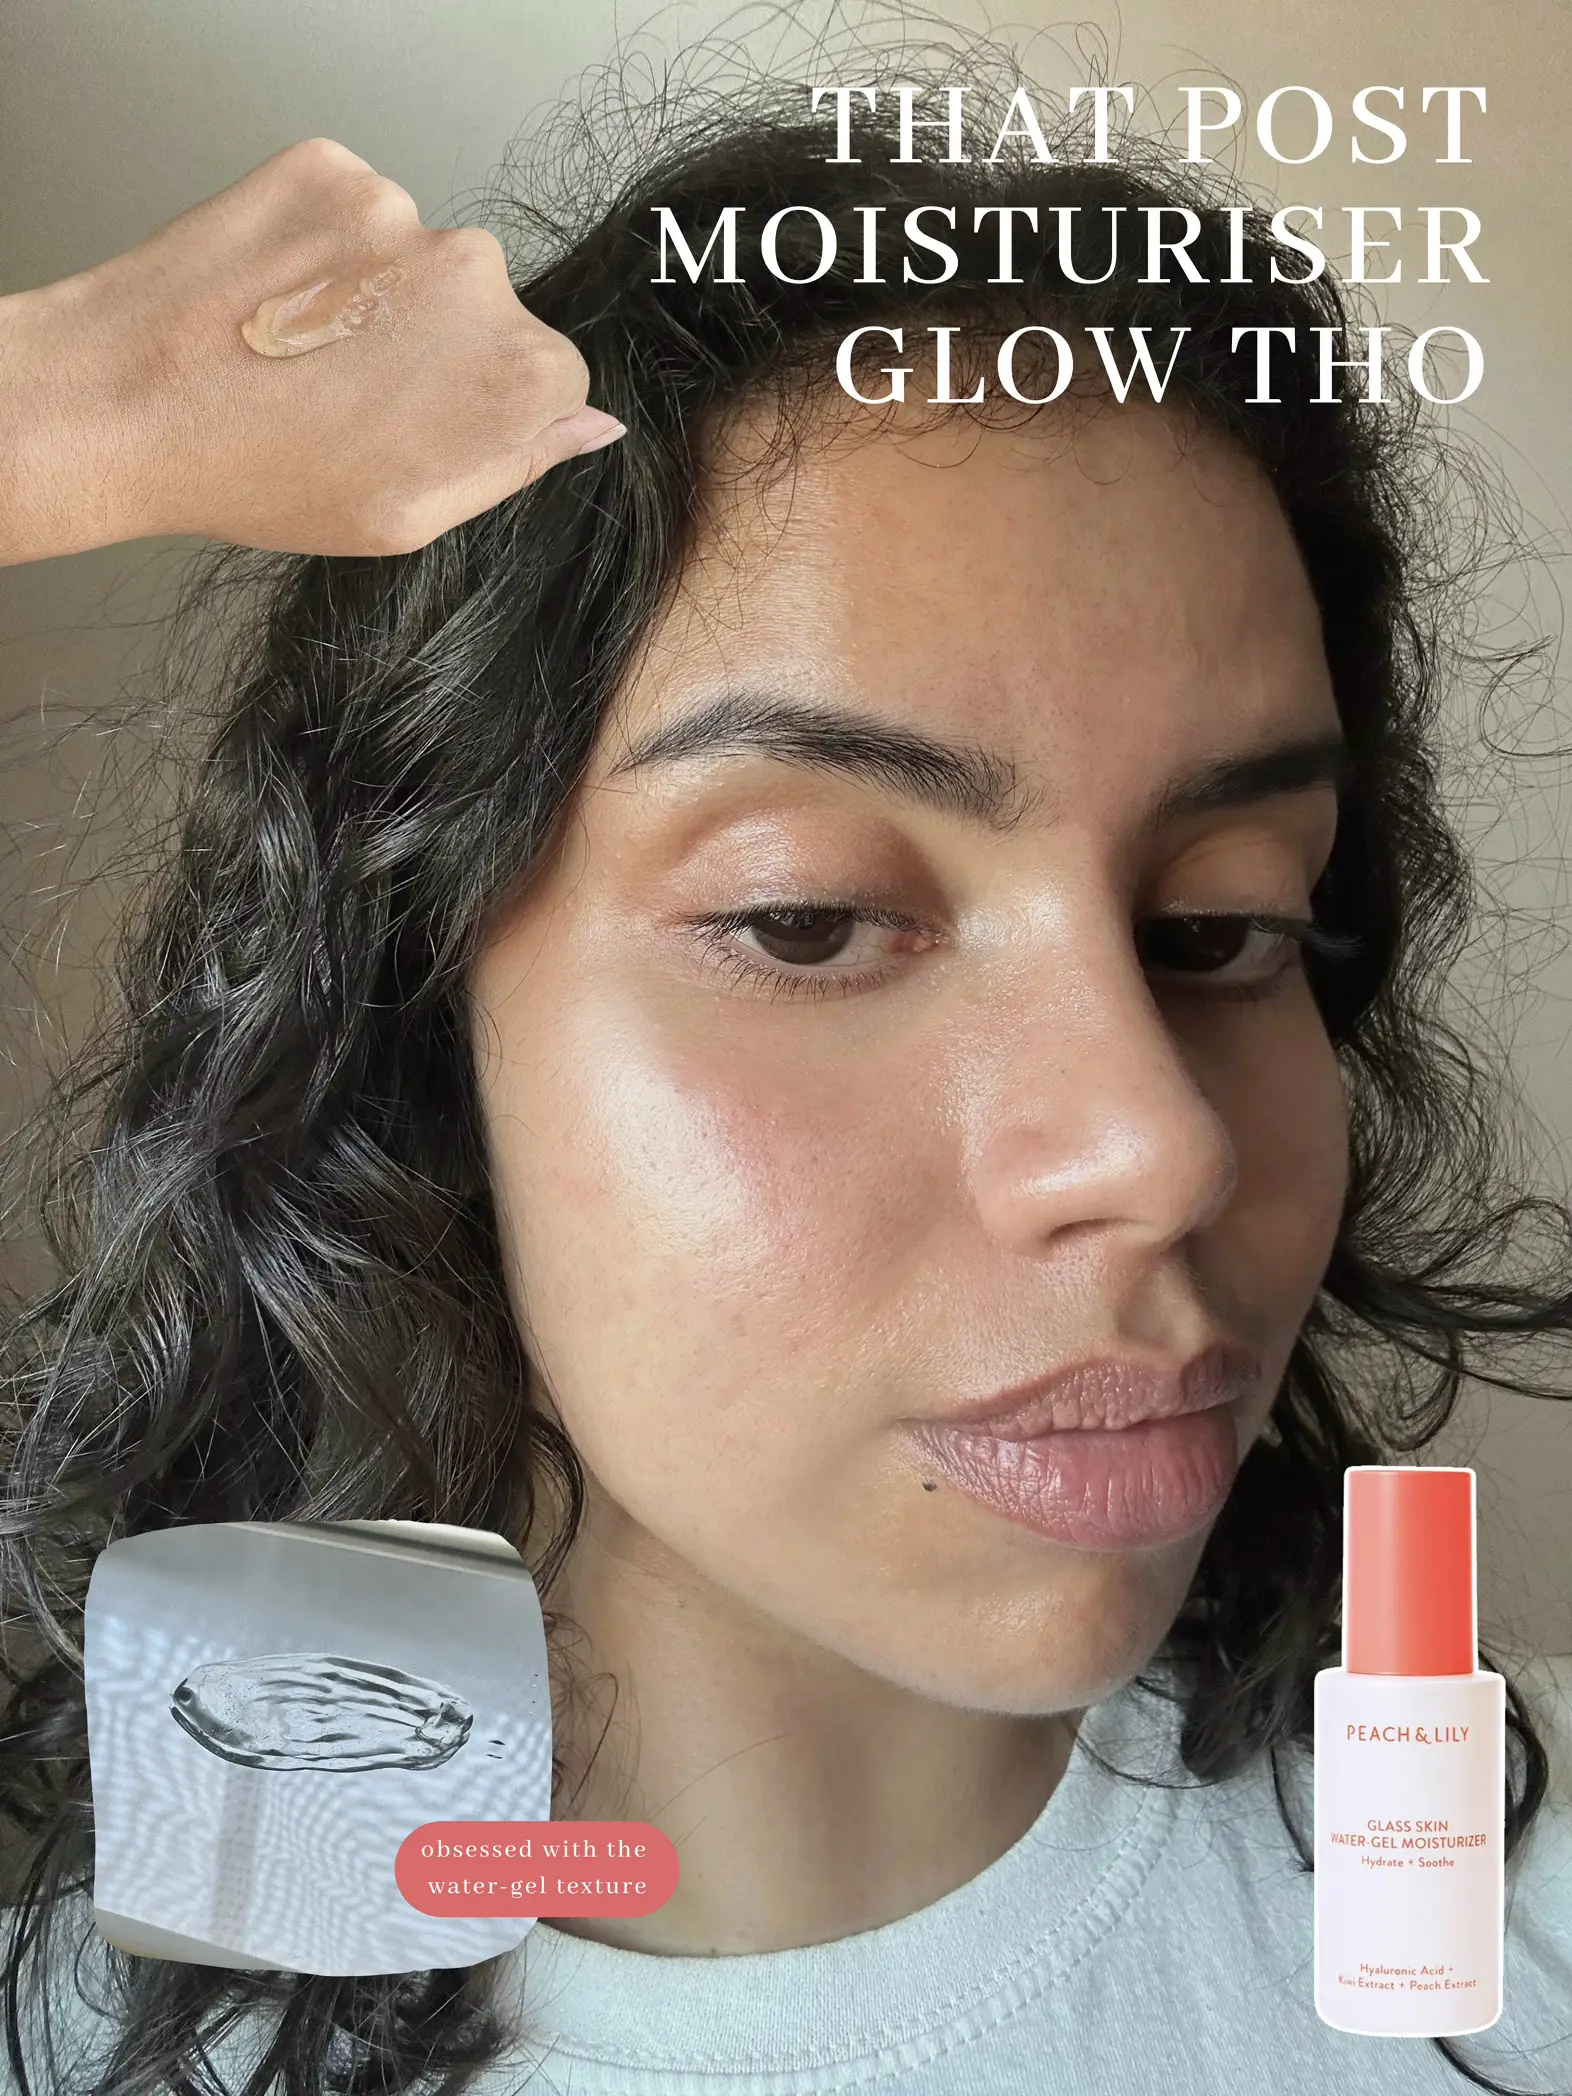 Peach and lily glass skin serum  Gallery posted by Safna Suhood